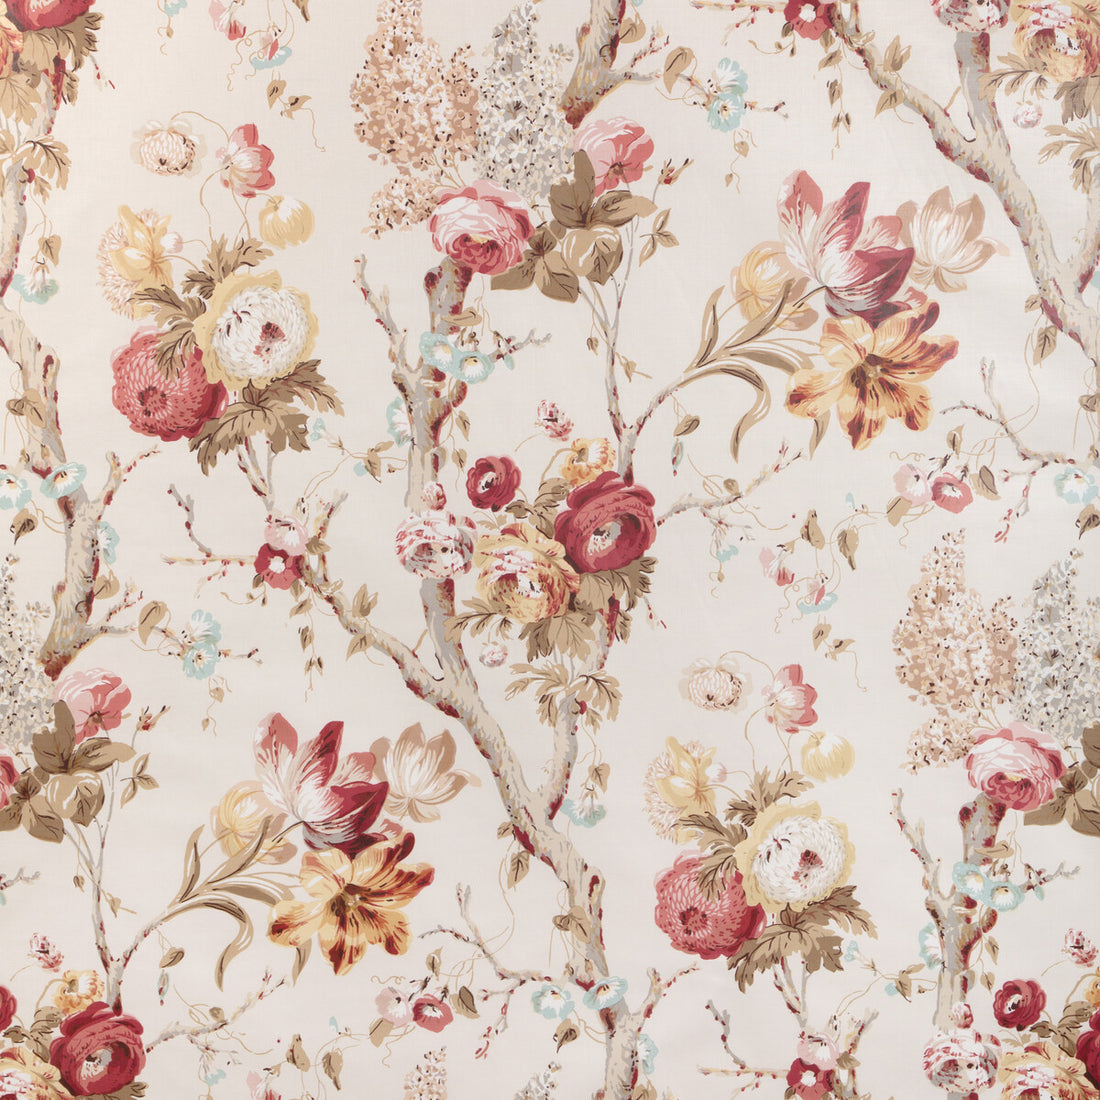 Trentham Hall fabric in rose color - pattern 2023119.417.0 - by Lee Jofa in the Lee Jofa 200 collection